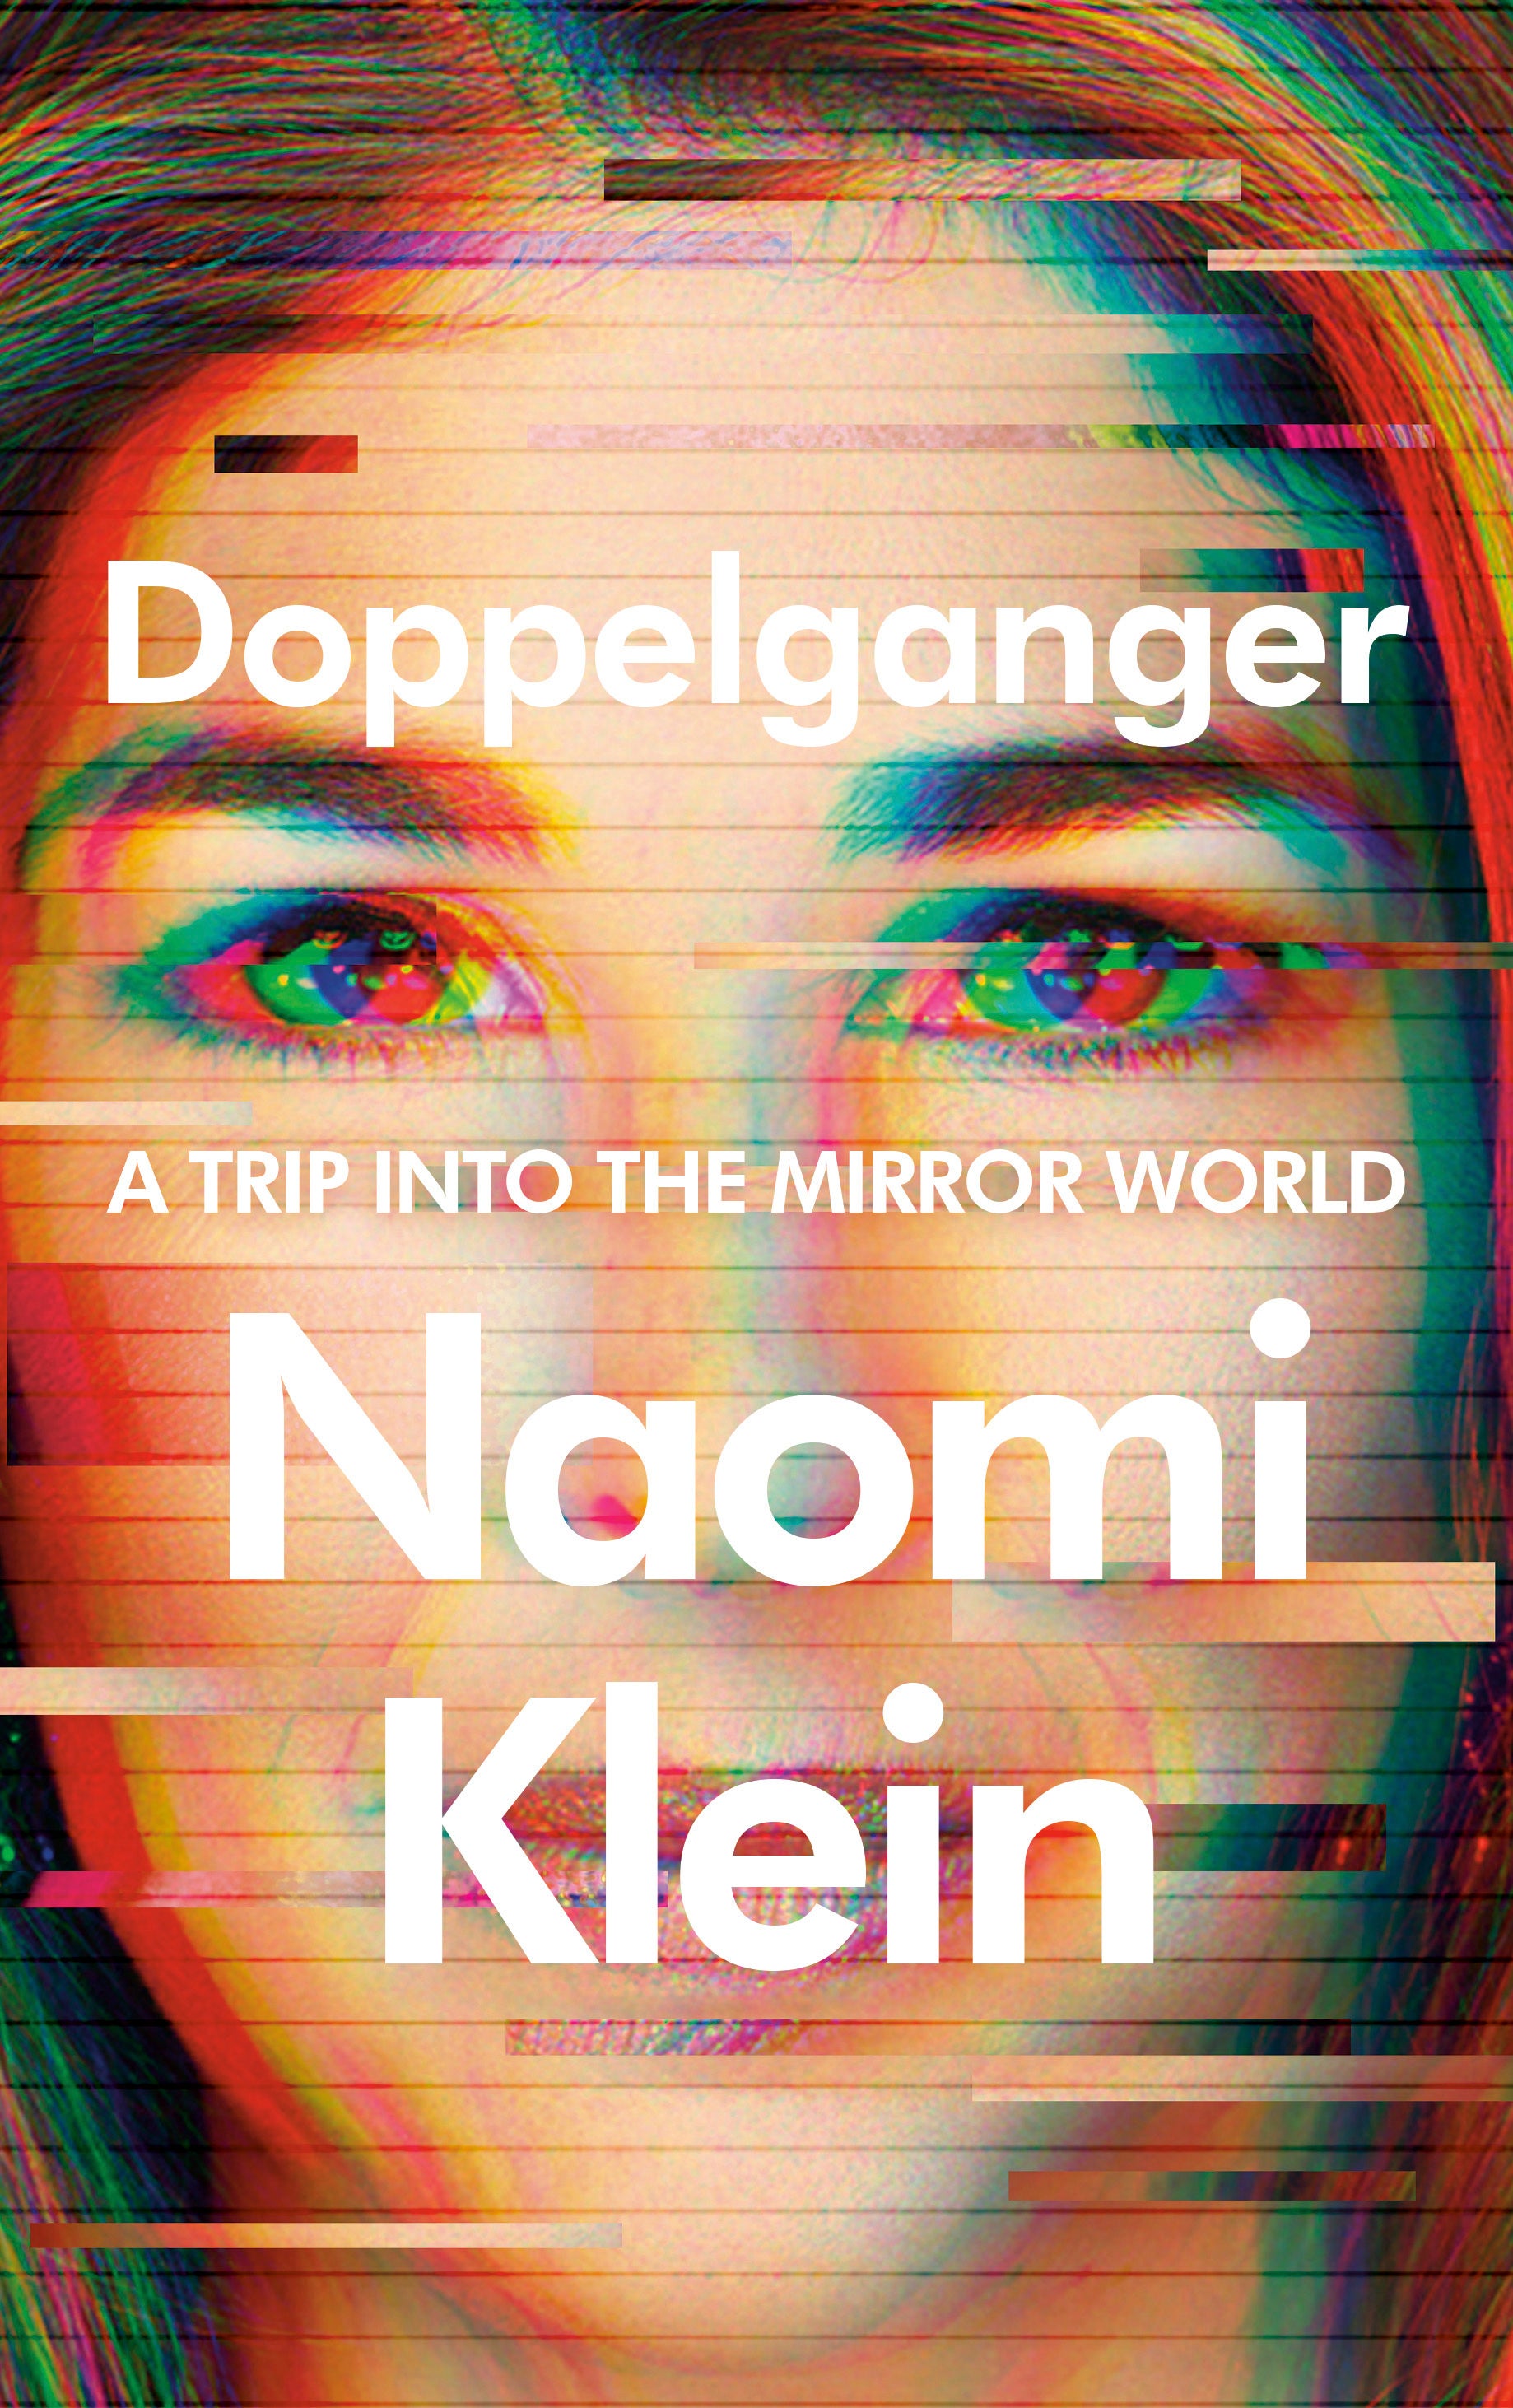 Naomi Klein has new, more personal book out in September, 'Doppelganger